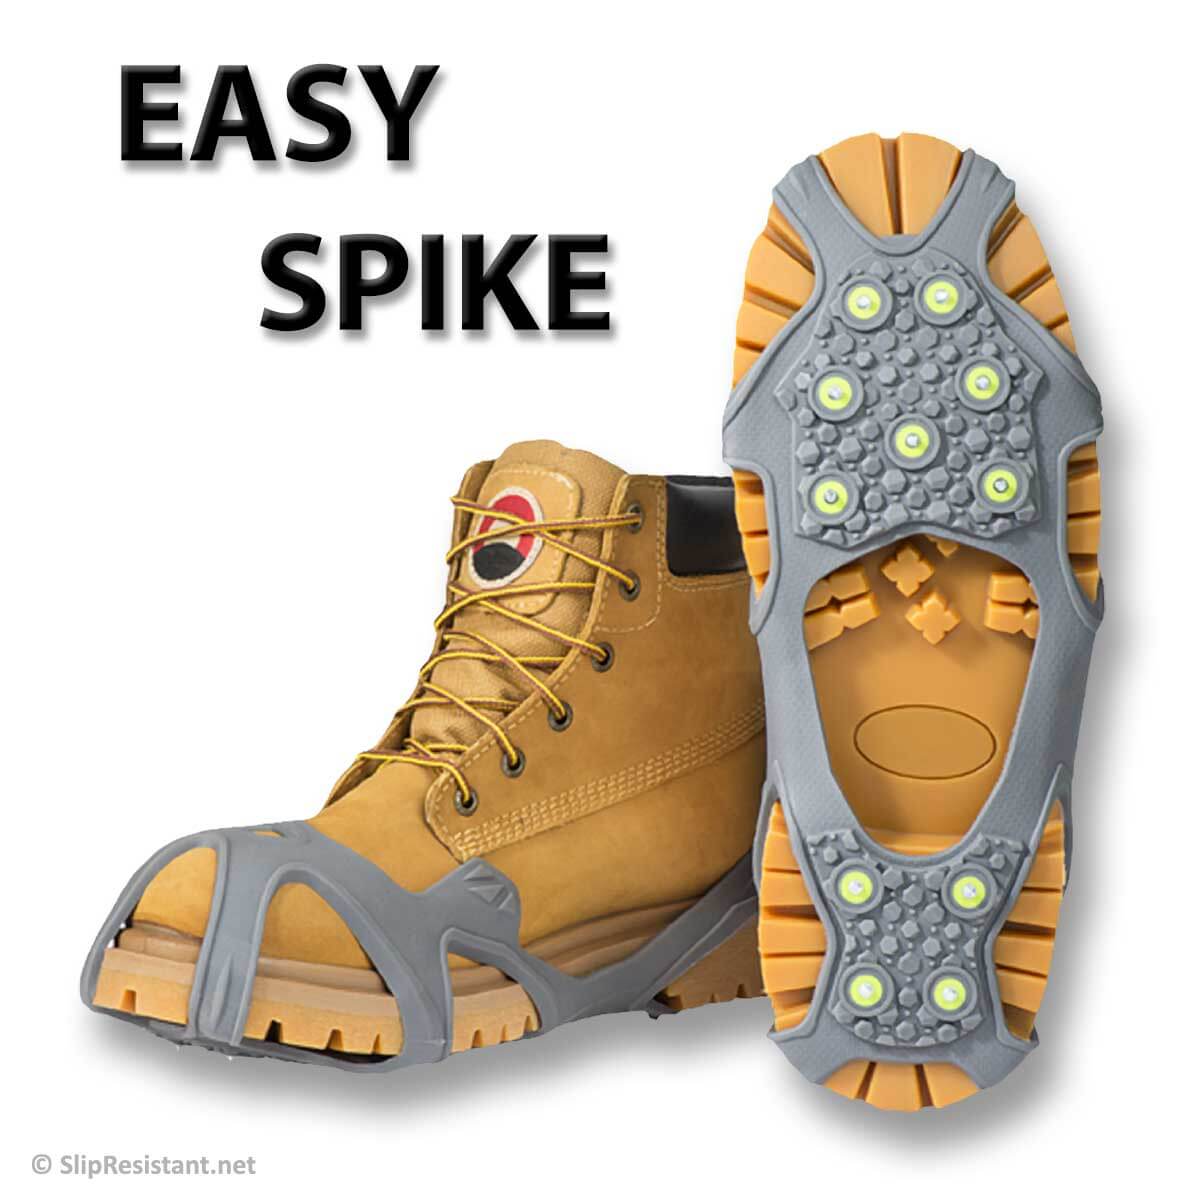 Winter Walking EASY SPIKE™ Ice Cleats for Shoes and Boots.